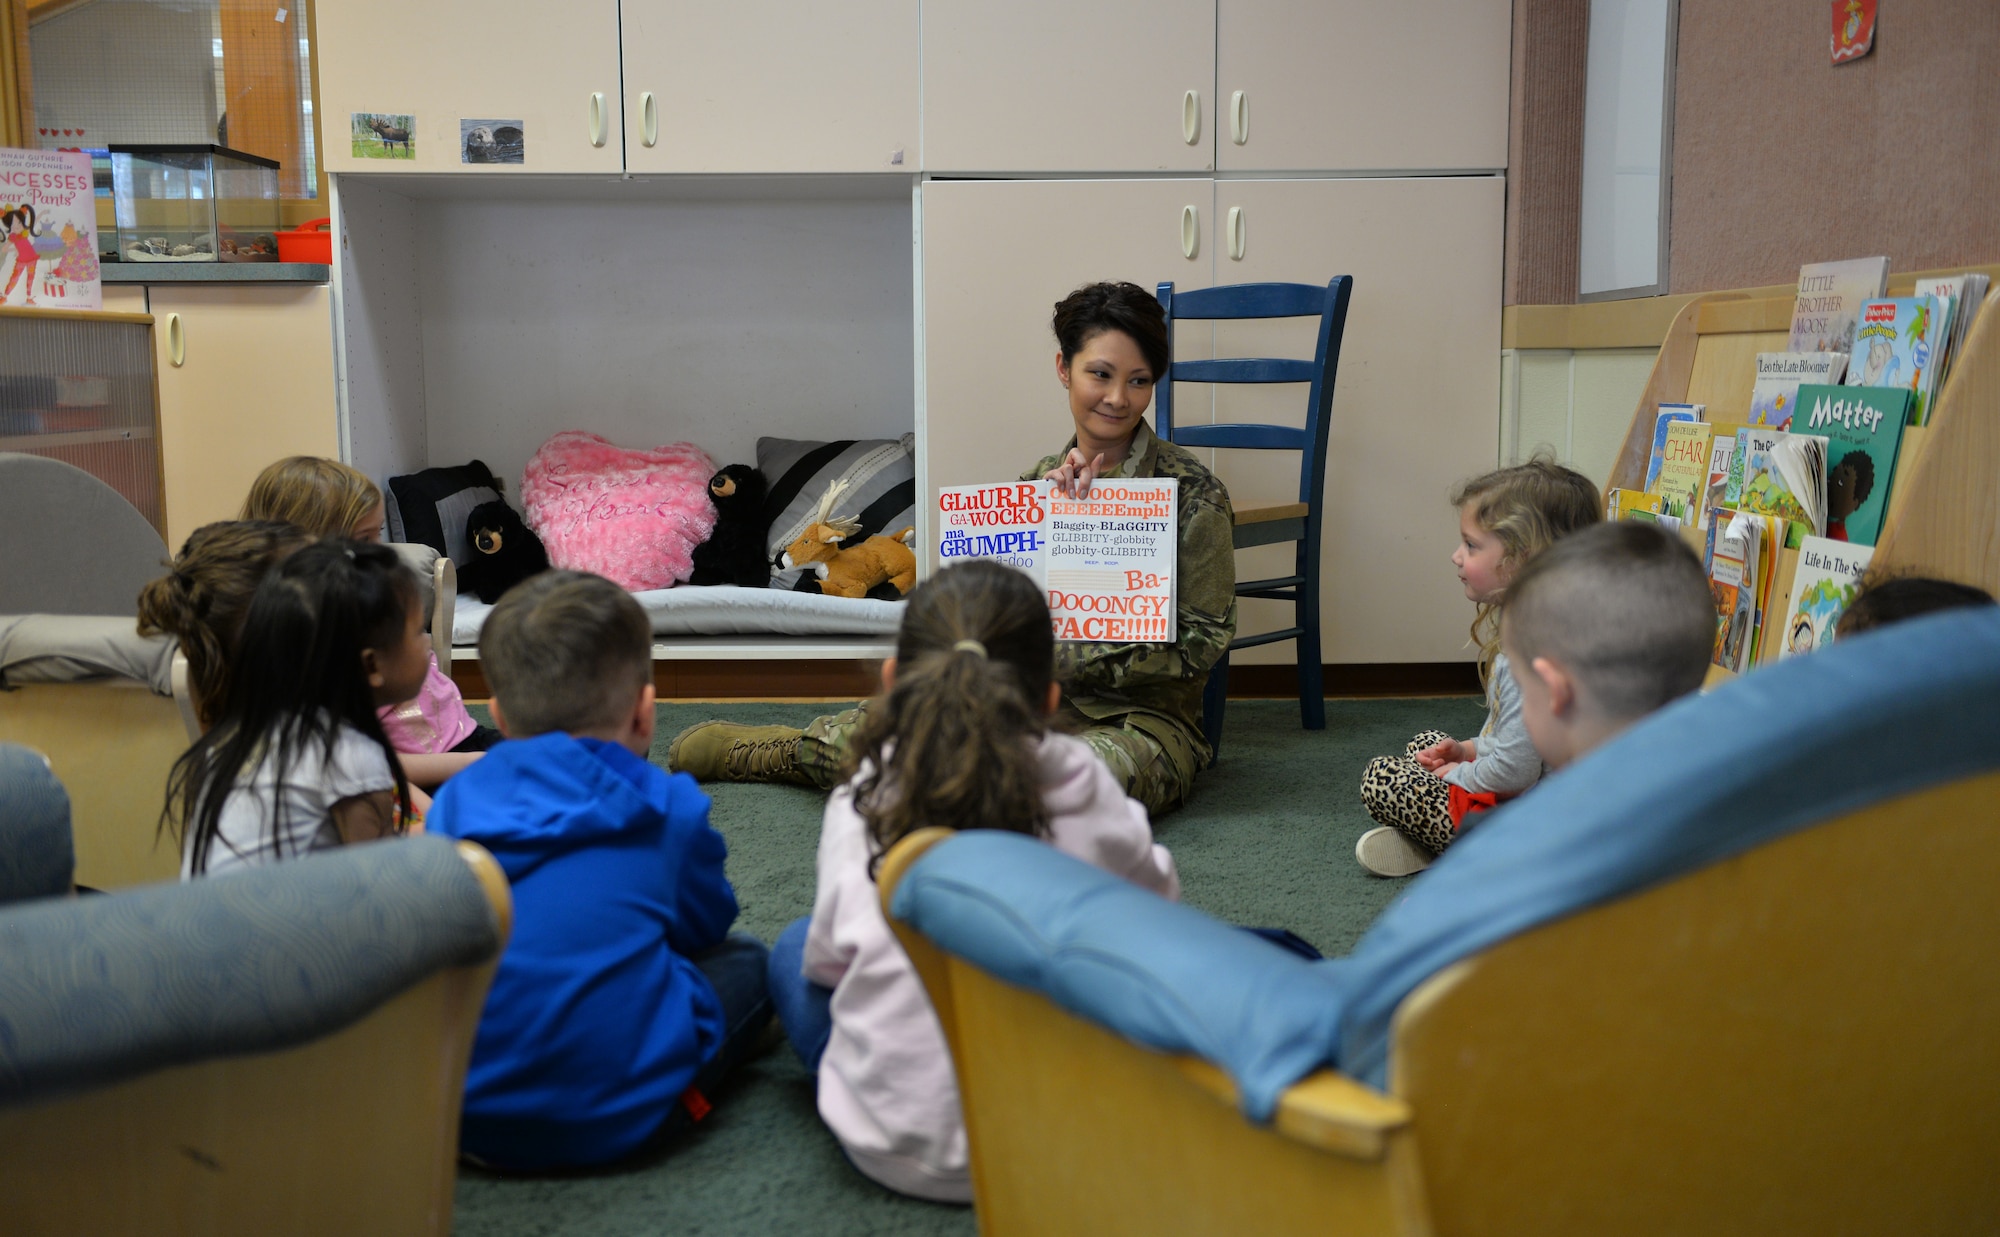 In honor of The Month of the Military Child, U.S. Air Force Col. Patricia Csànk, Joint Base Elmendorf-Richardson and 673d Air Base Wing commander, visited the Denali Child Development Center to read to some of the children, JBER, Alaska, April 8, 2019. Out of the selection of four books, the kids elected to read “The Book With No Pictures,” by B.J. Novak, knowing all too well what this piece of literature would have Csànk reading aloud.